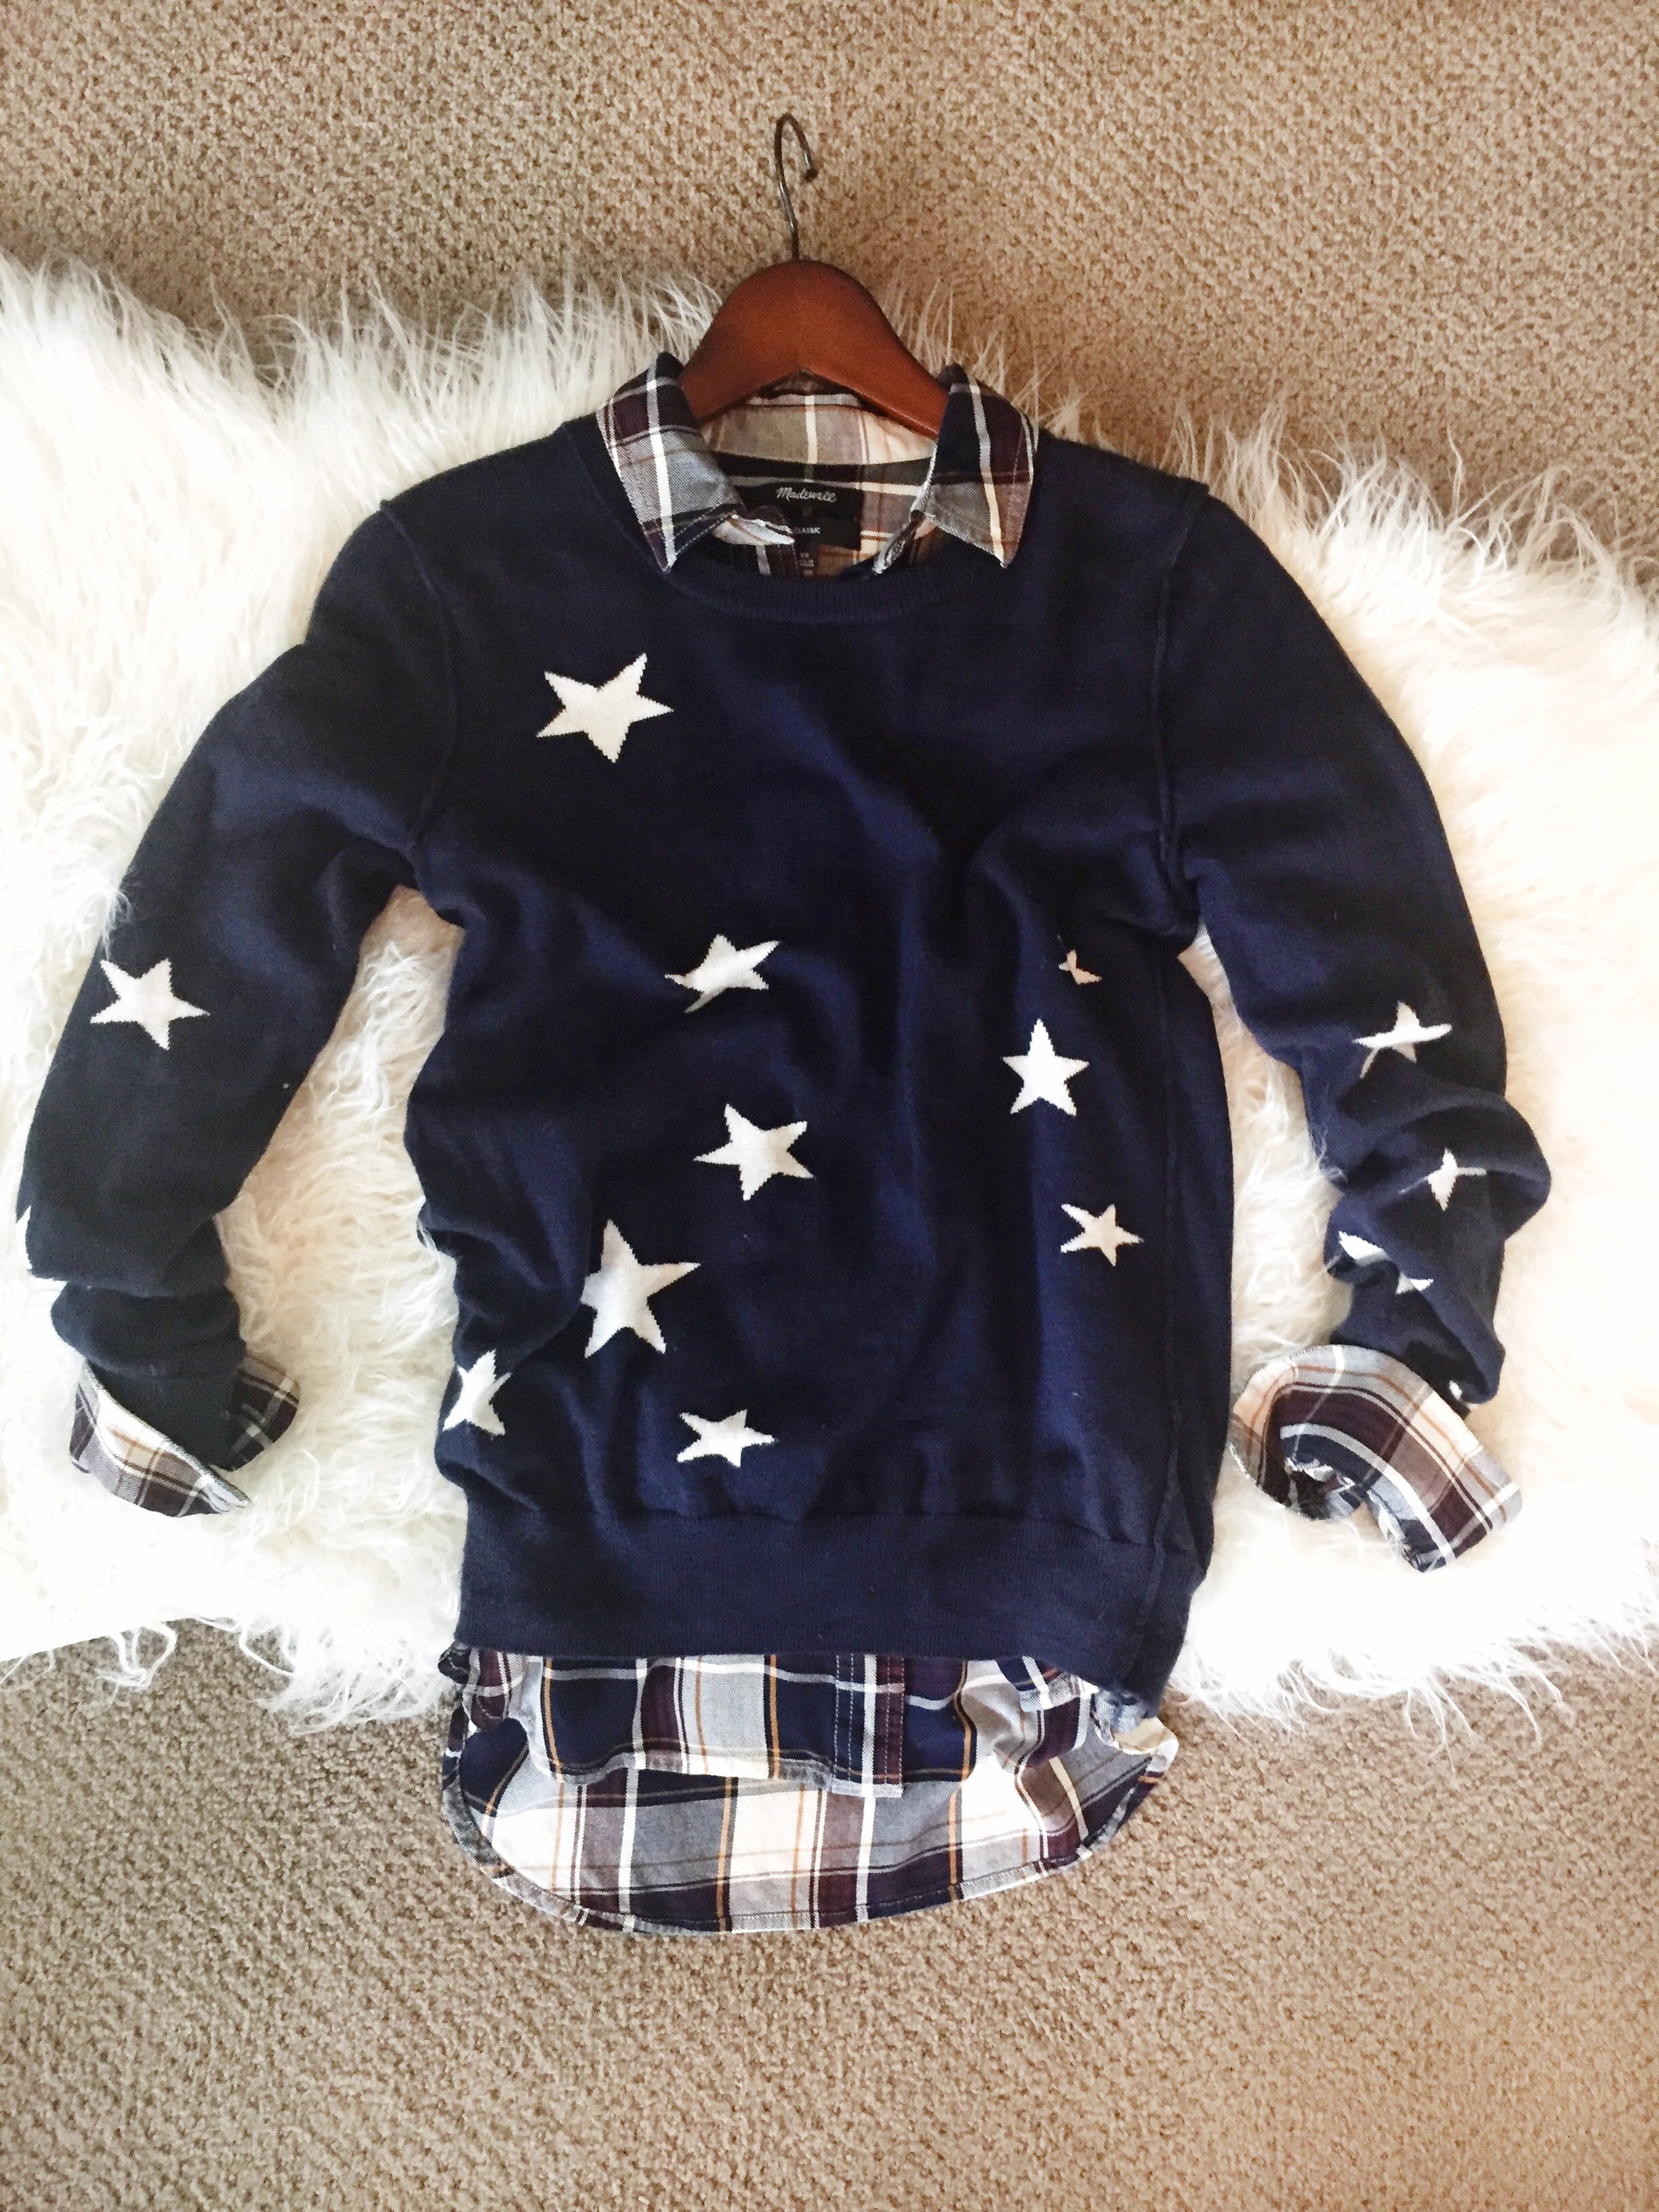 crew neck, sweaters, preppy, stars, stripes, layers, wear it, find your style, method39, navy, casual, everyday style